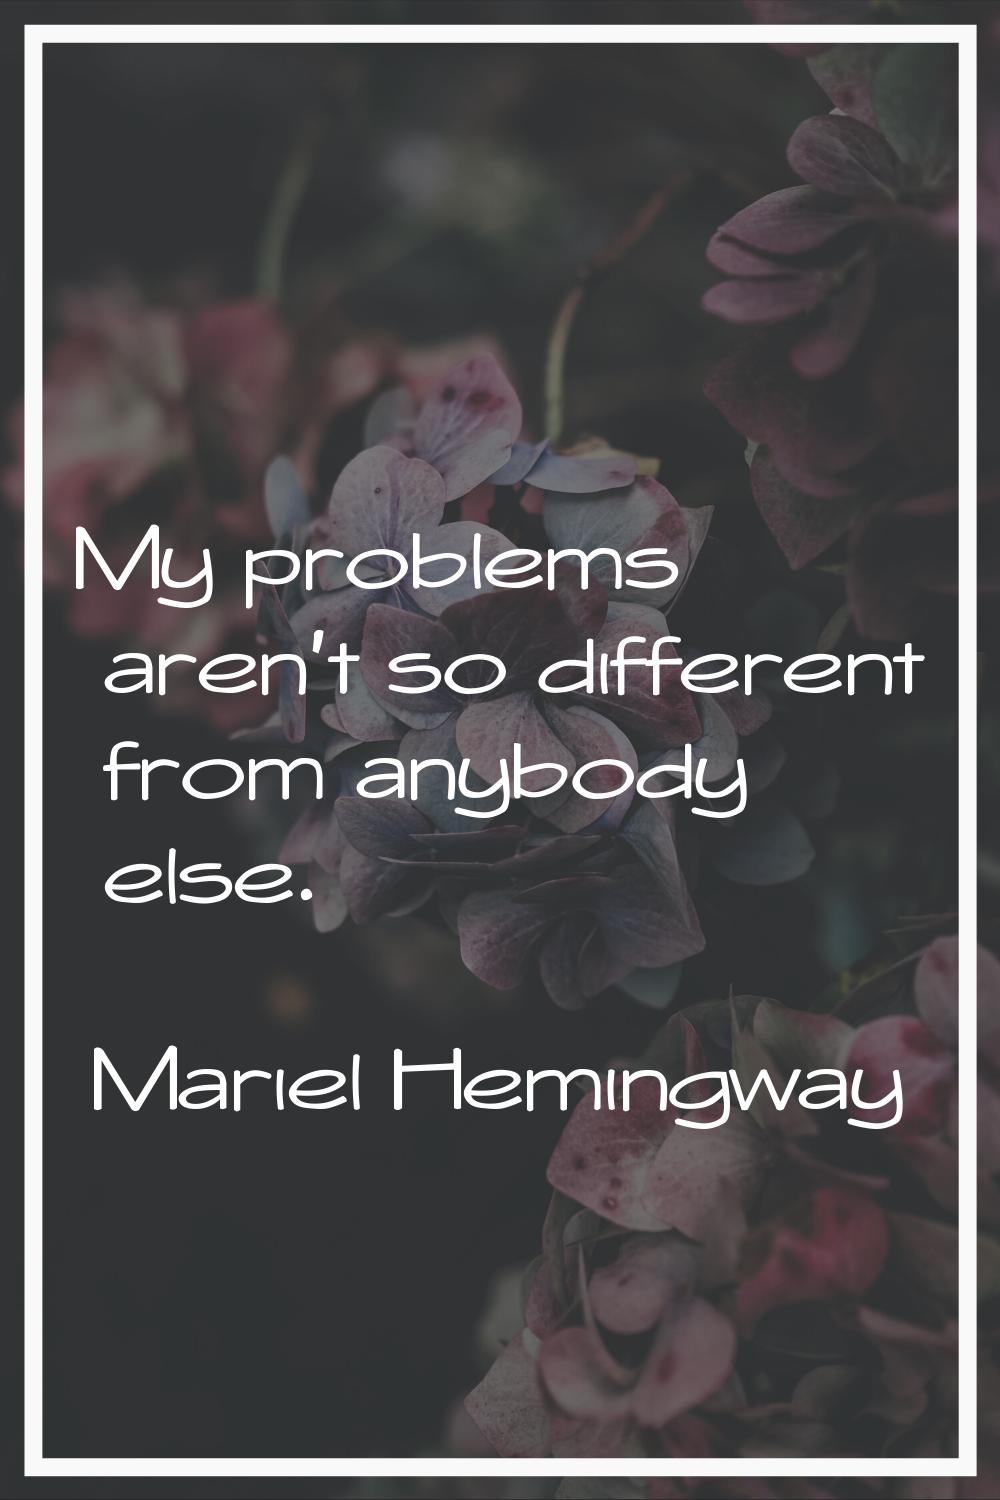 My problems aren't so different from anybody else.